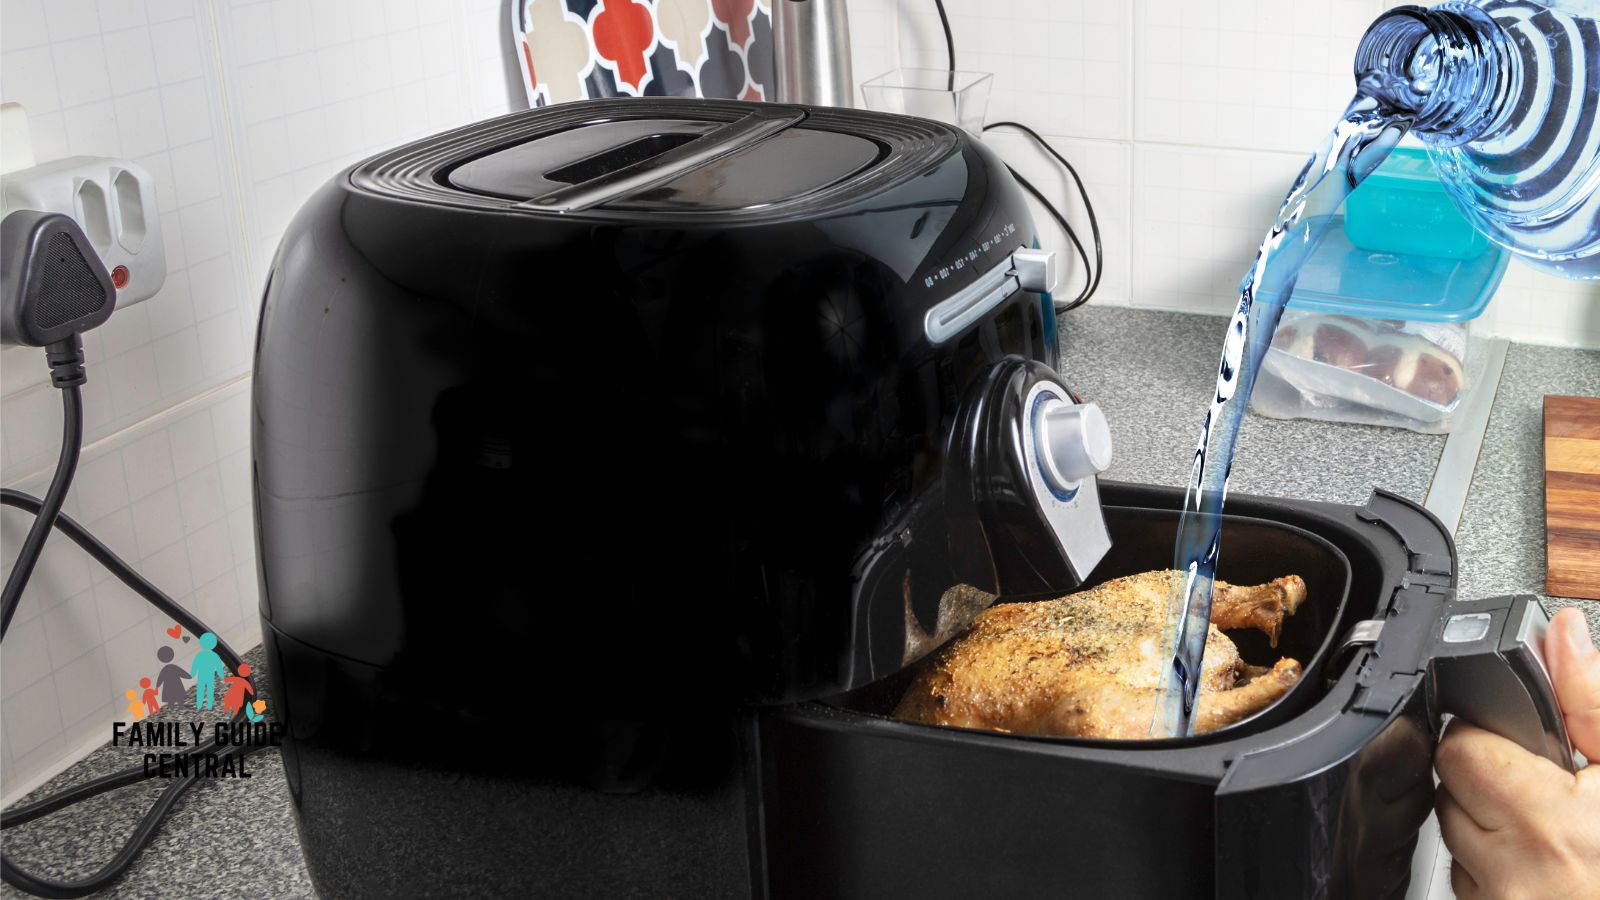 Pouring water into a air fryer - familyguidecentral.com